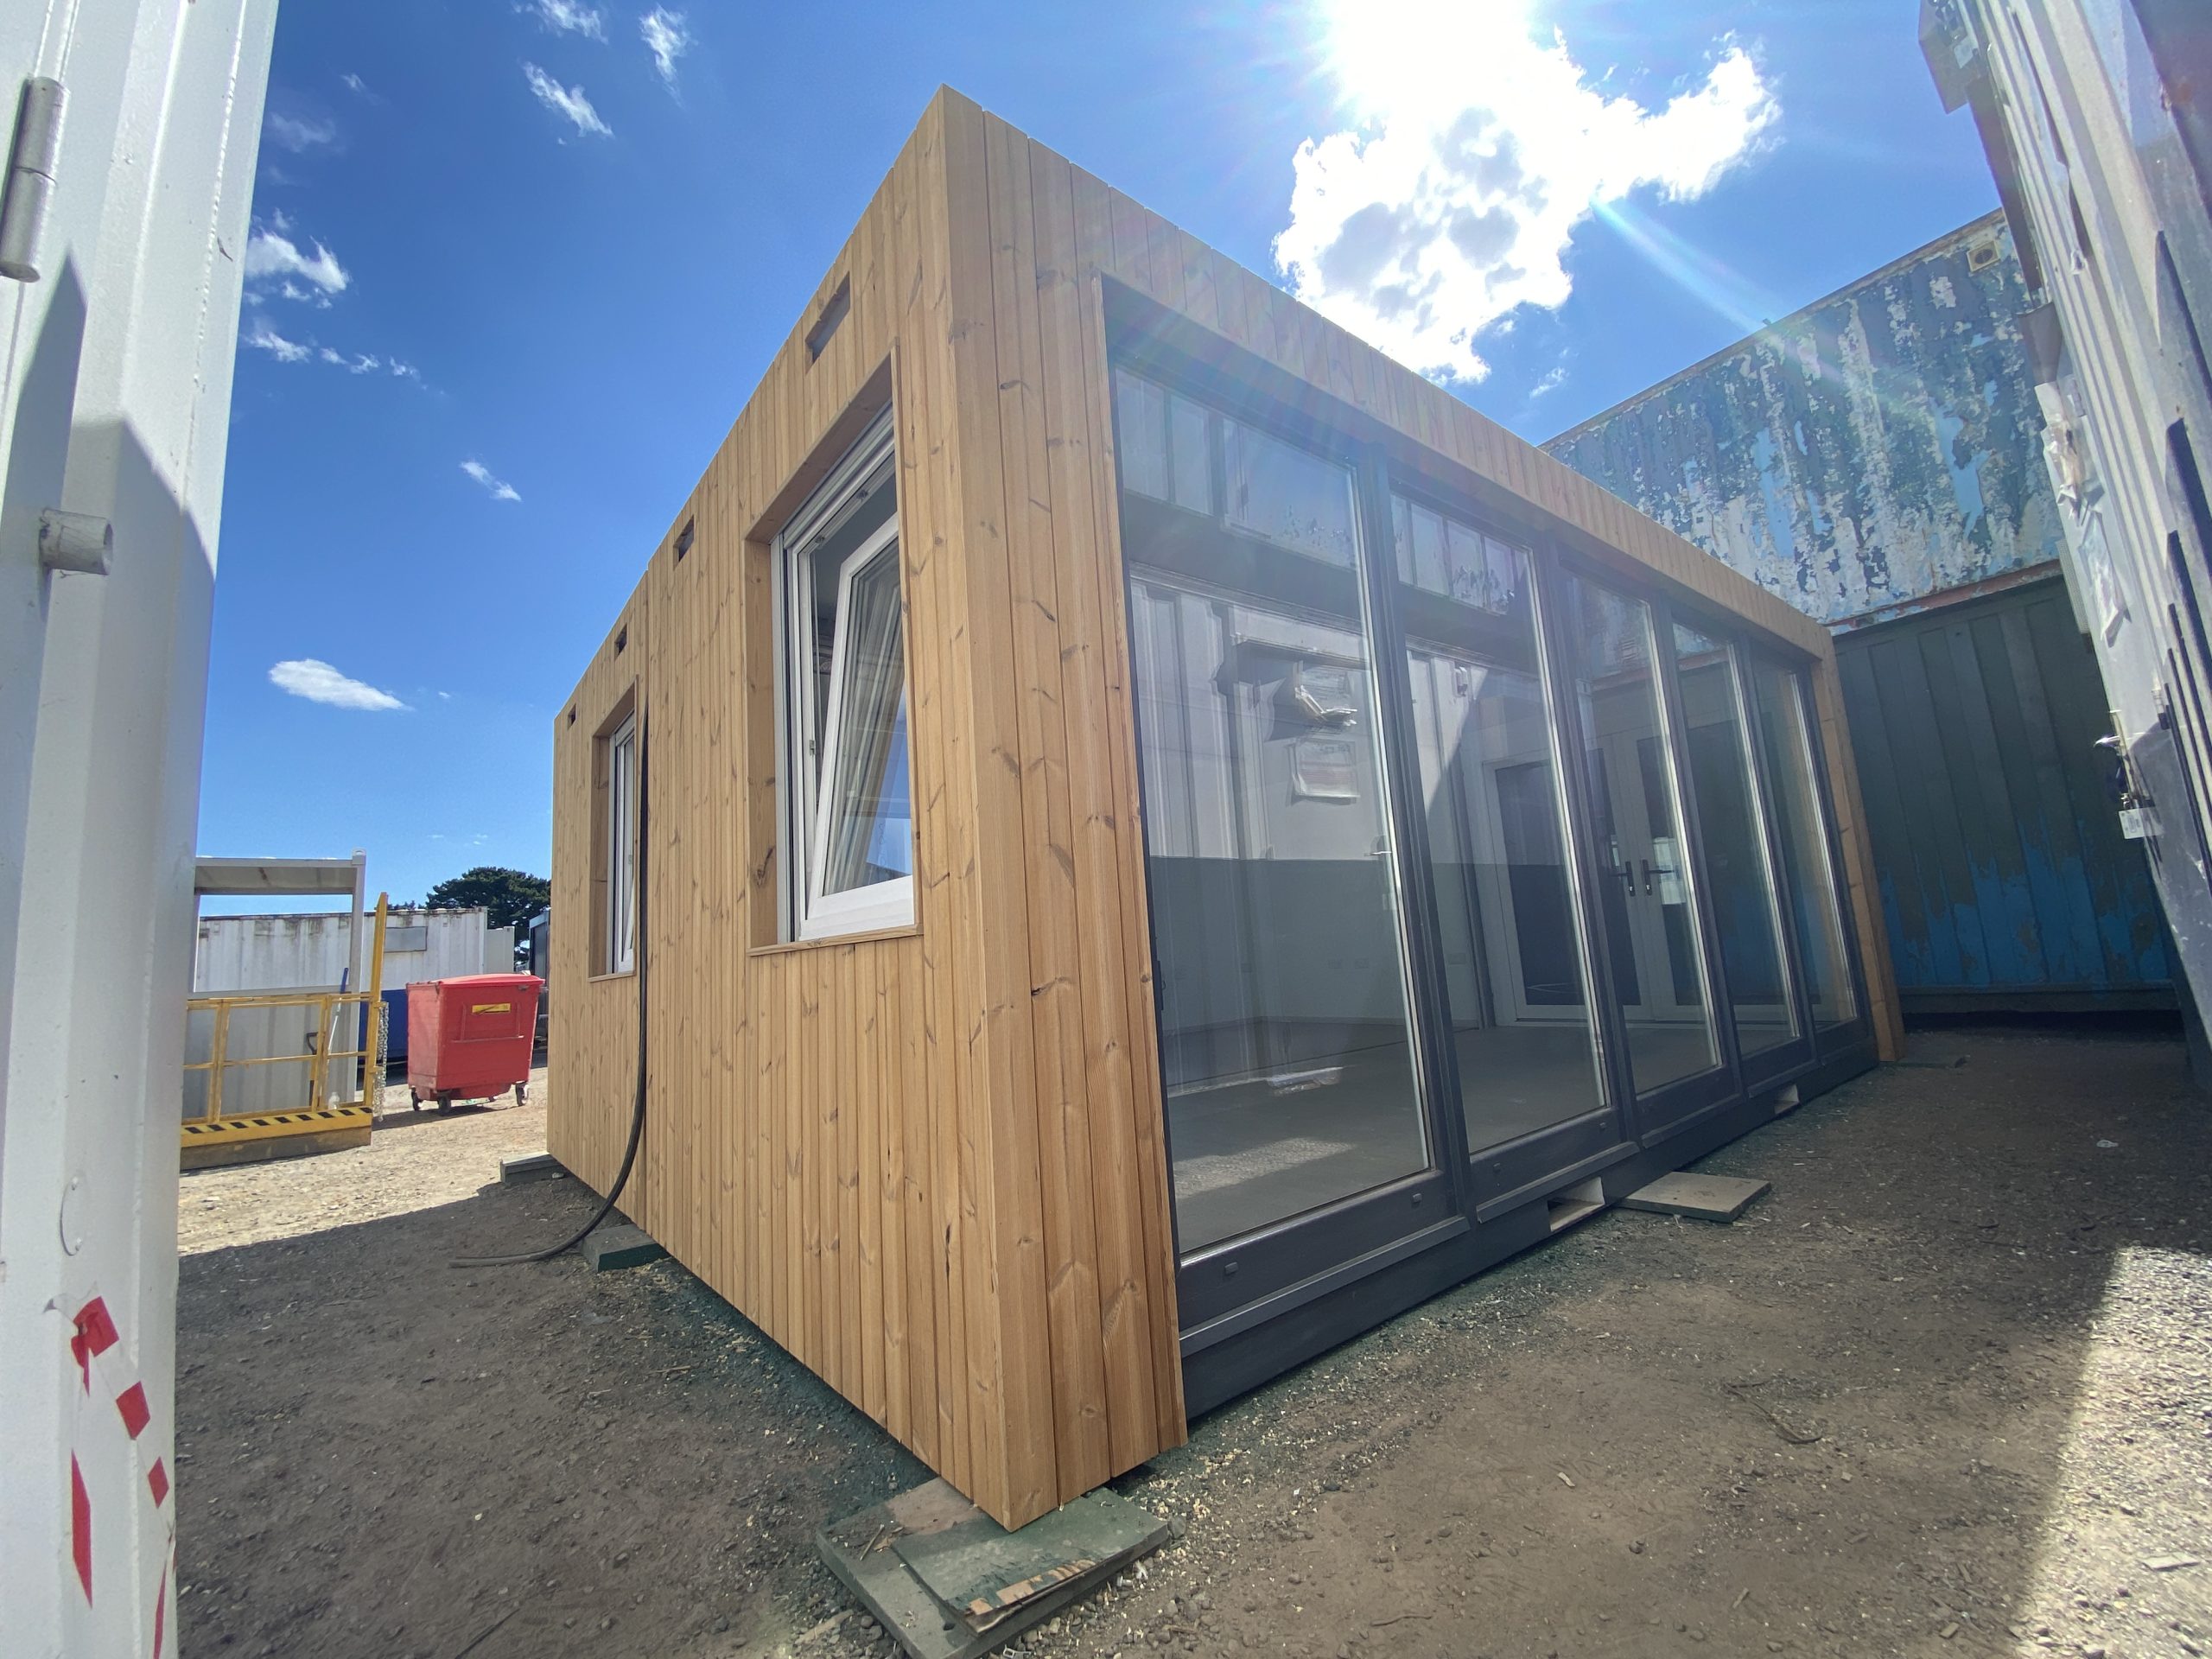 The exterior of a modular building with wooden panelling